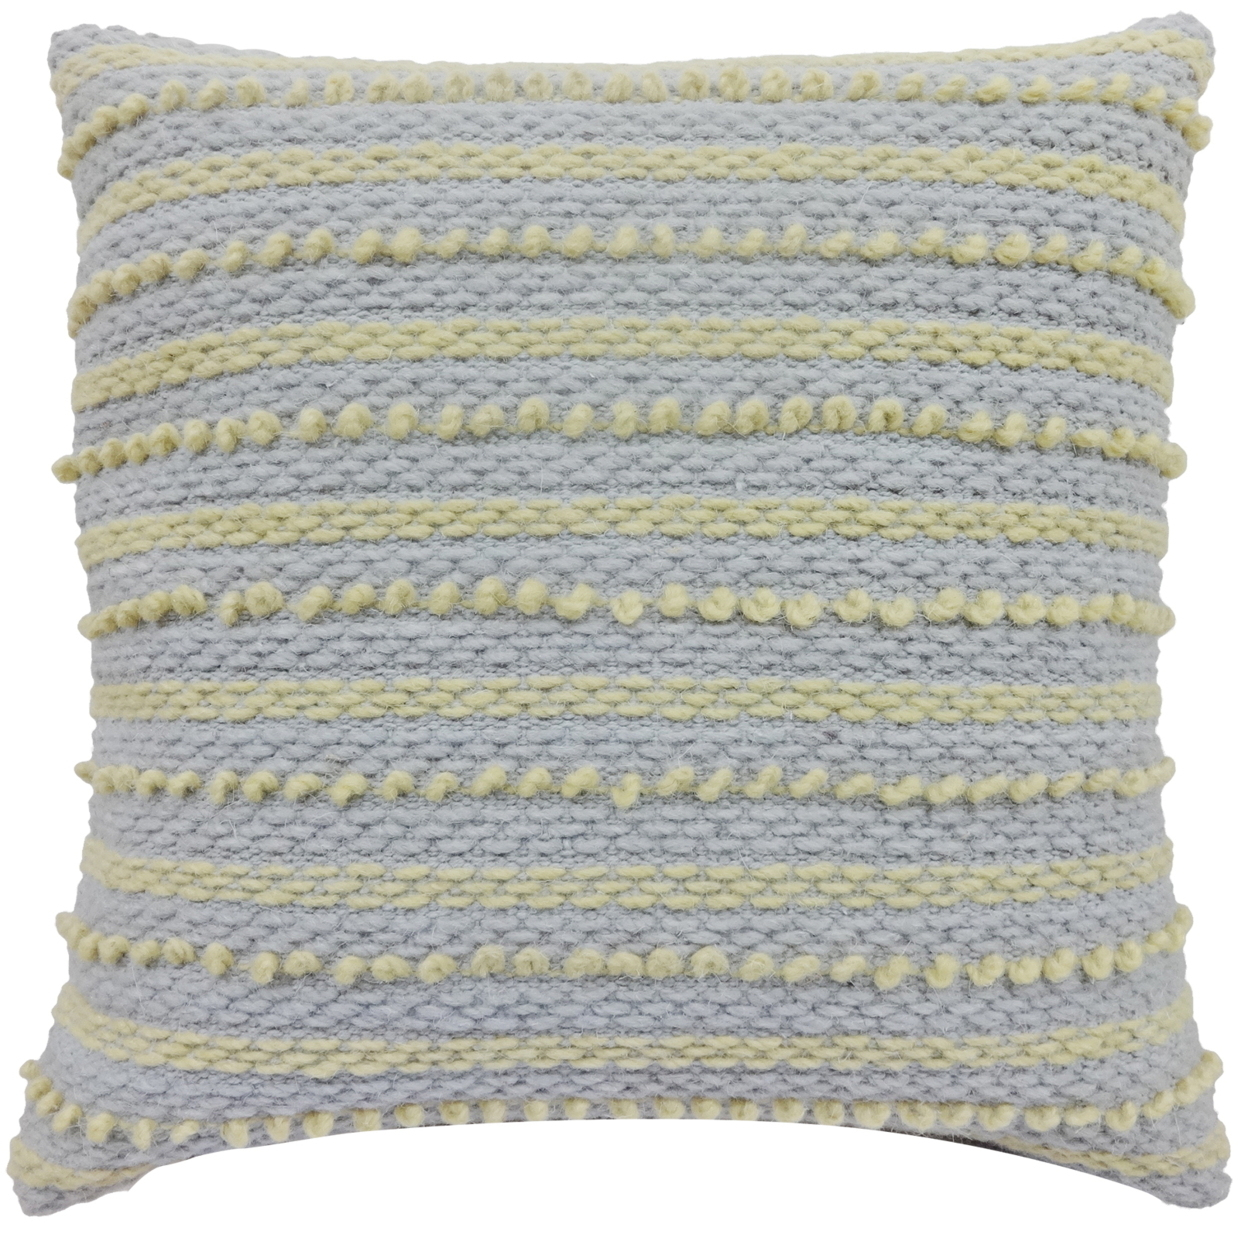 18 X 18 Inch Hand Woven Pillow With Stripe Pattern, Set Of 2, Blue And Yellow- Saltoro Sherpi